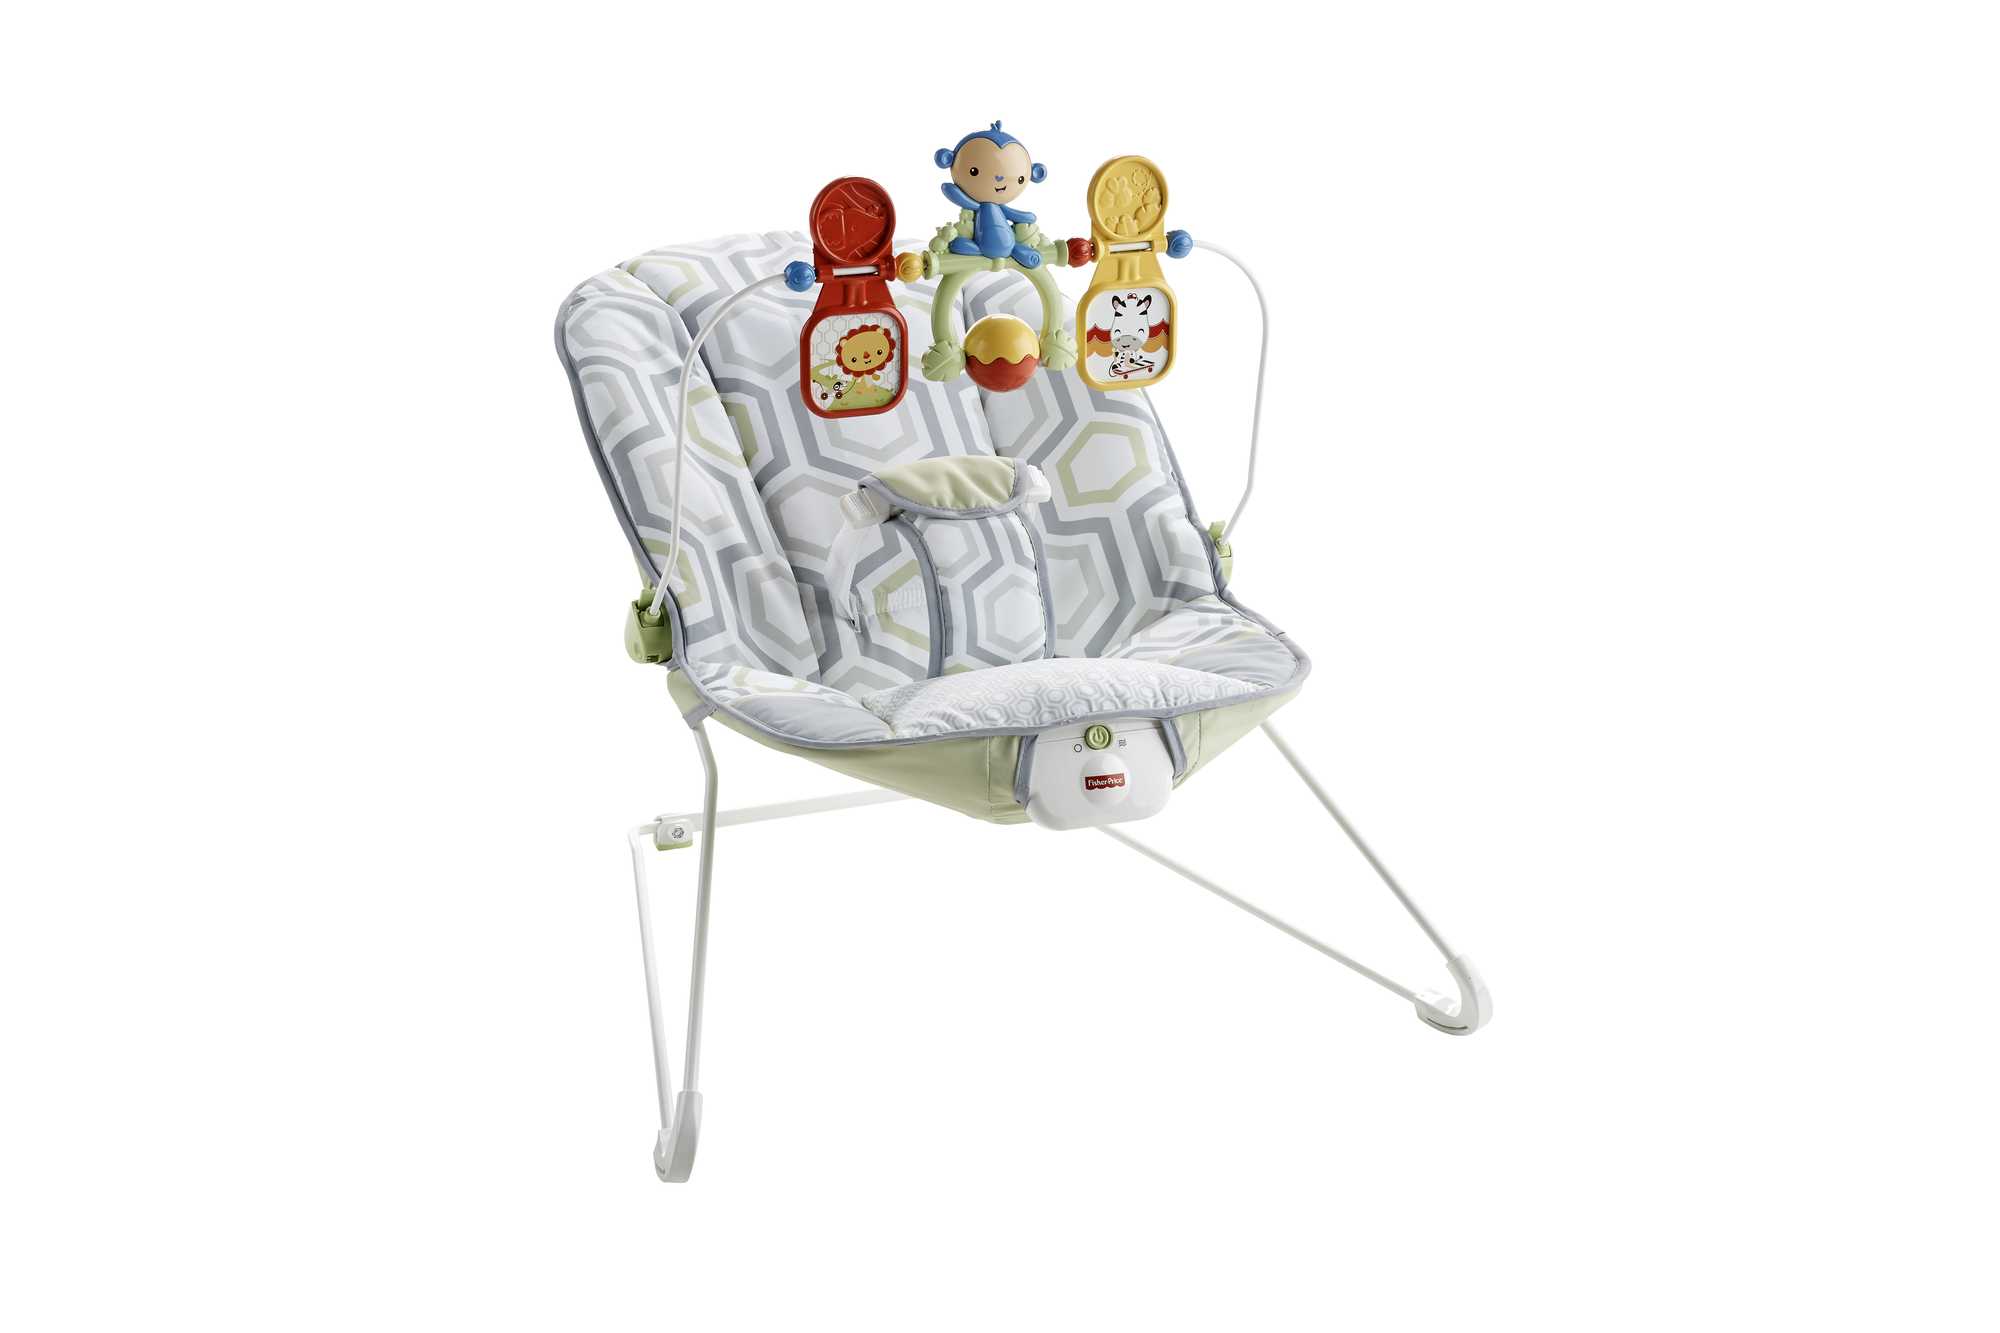 Fisher-Price Baby's Bouncer for Infants Birth+, Geo Meadow - image 5 of 6